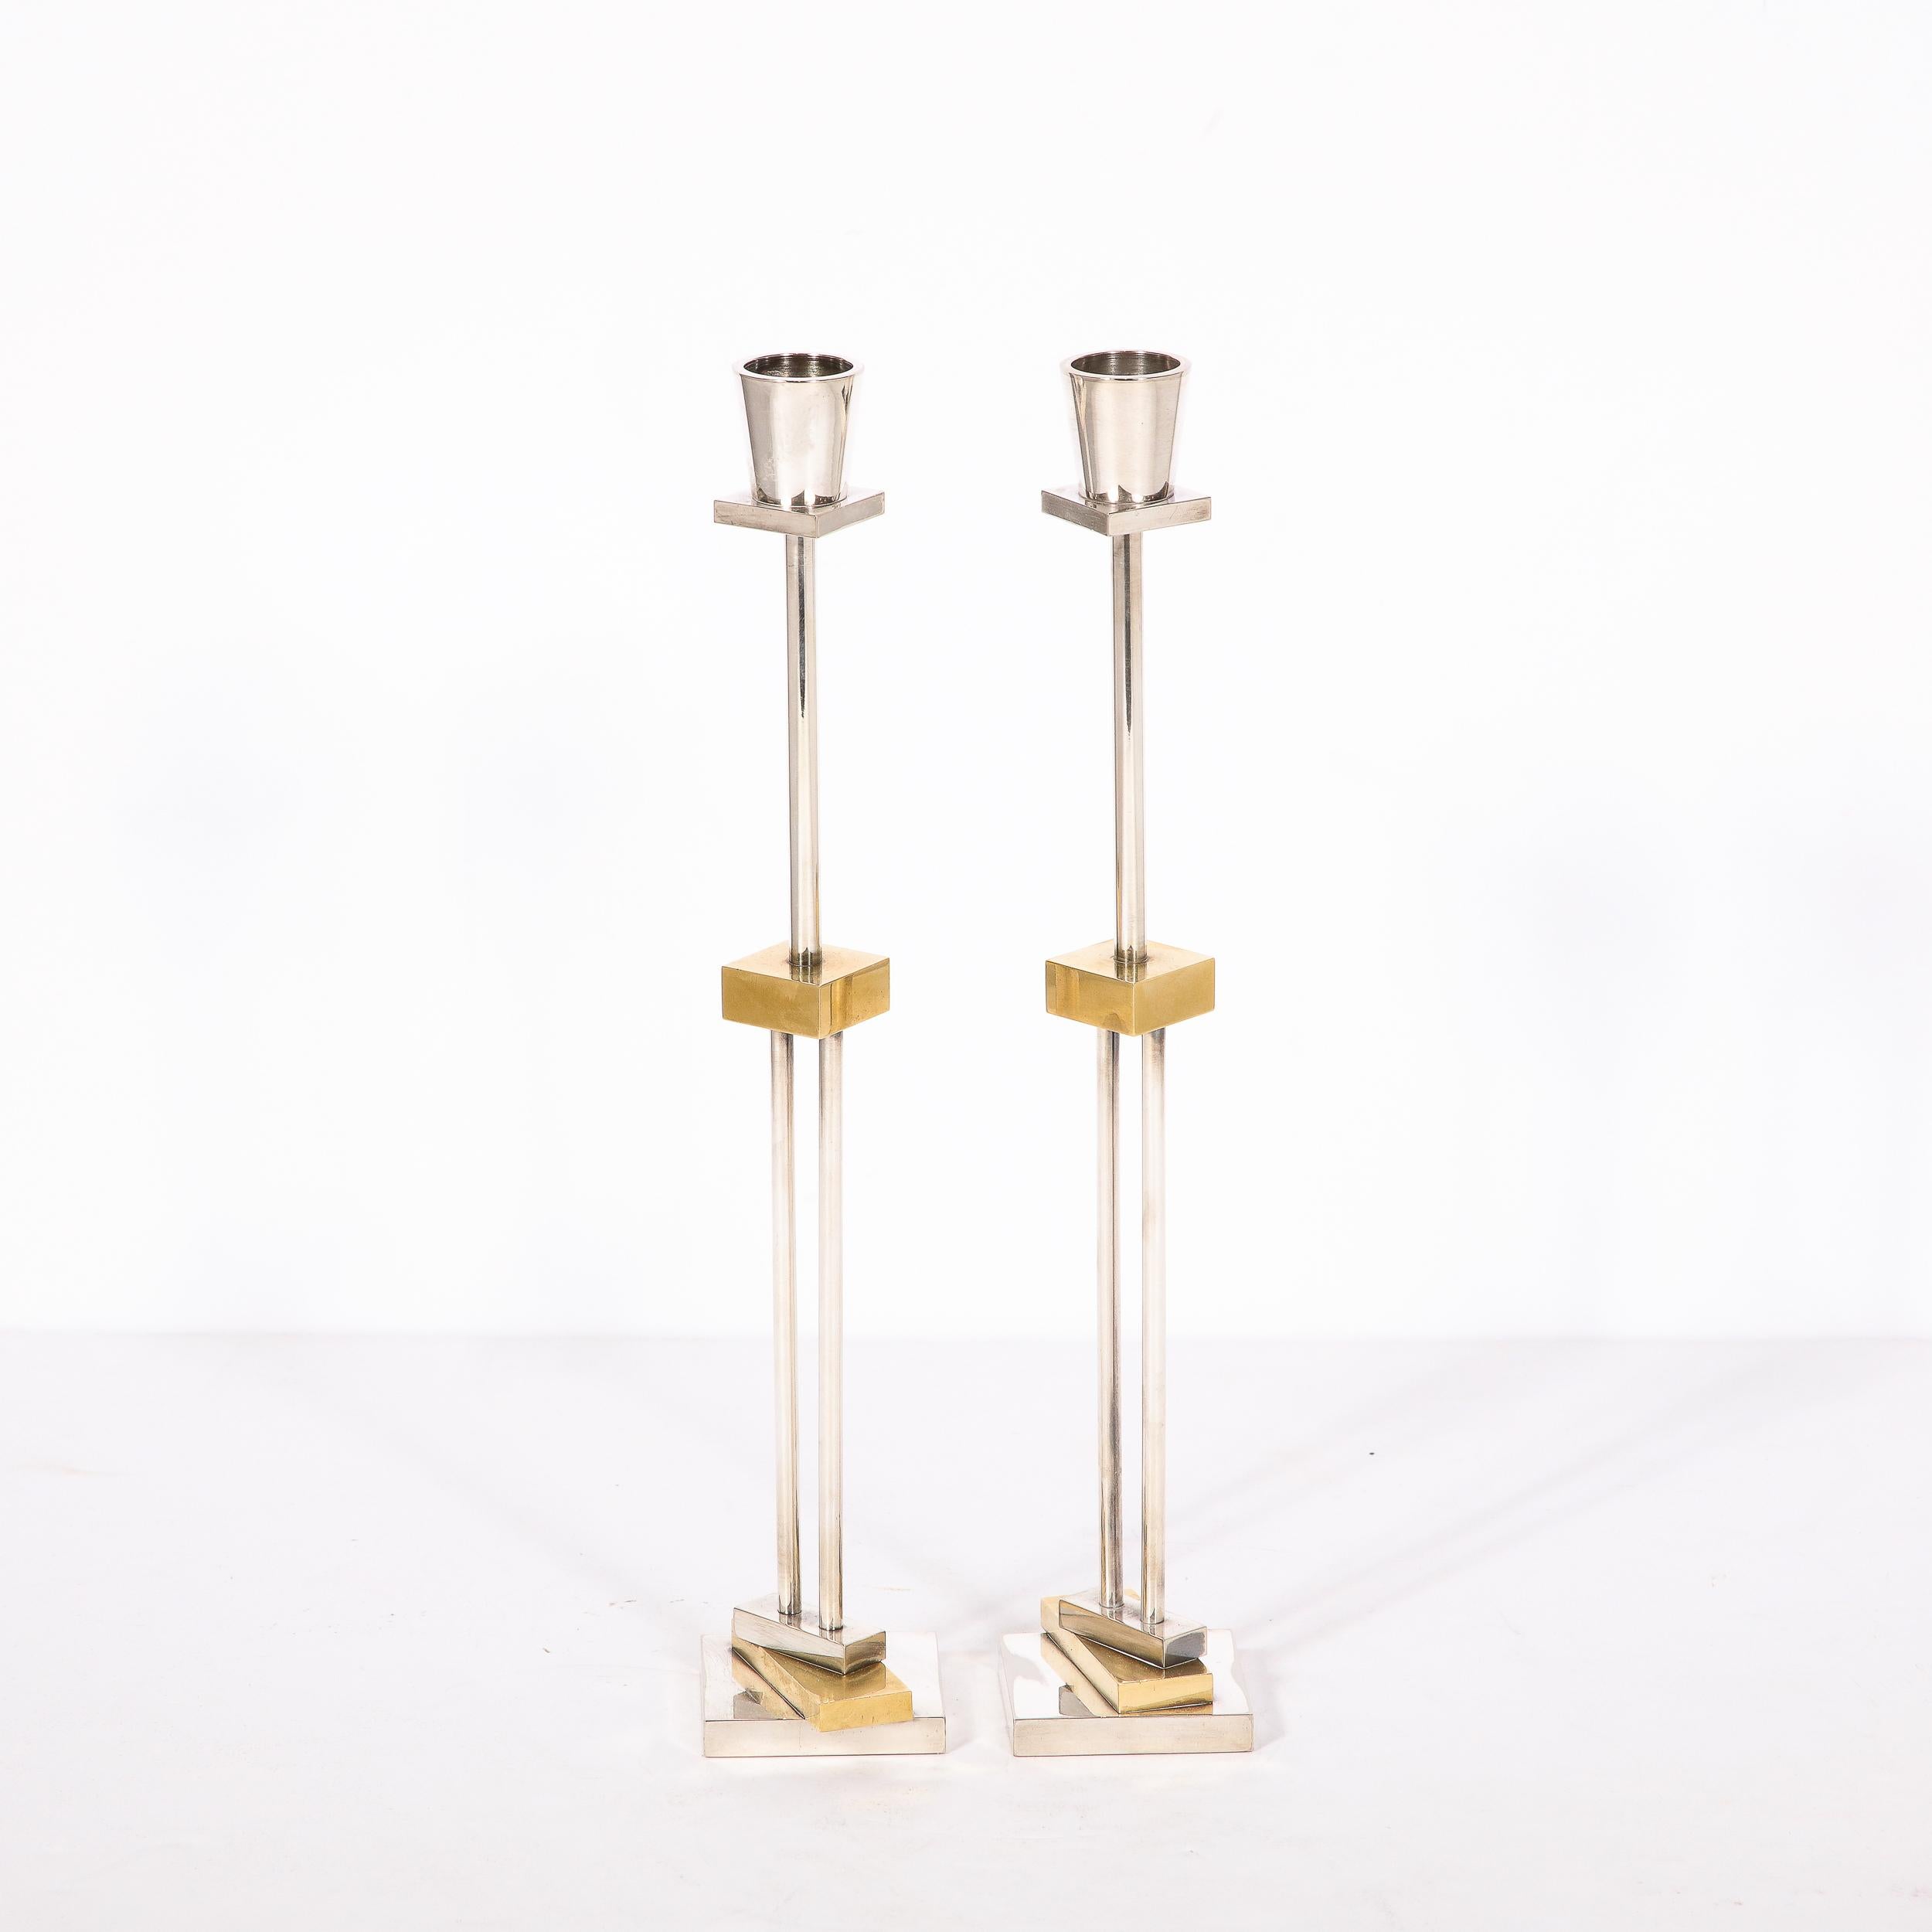 Late 20th Century Pair of Silver Plate & Brass Candlesticks by Ettore Sottsass for Swid Powell